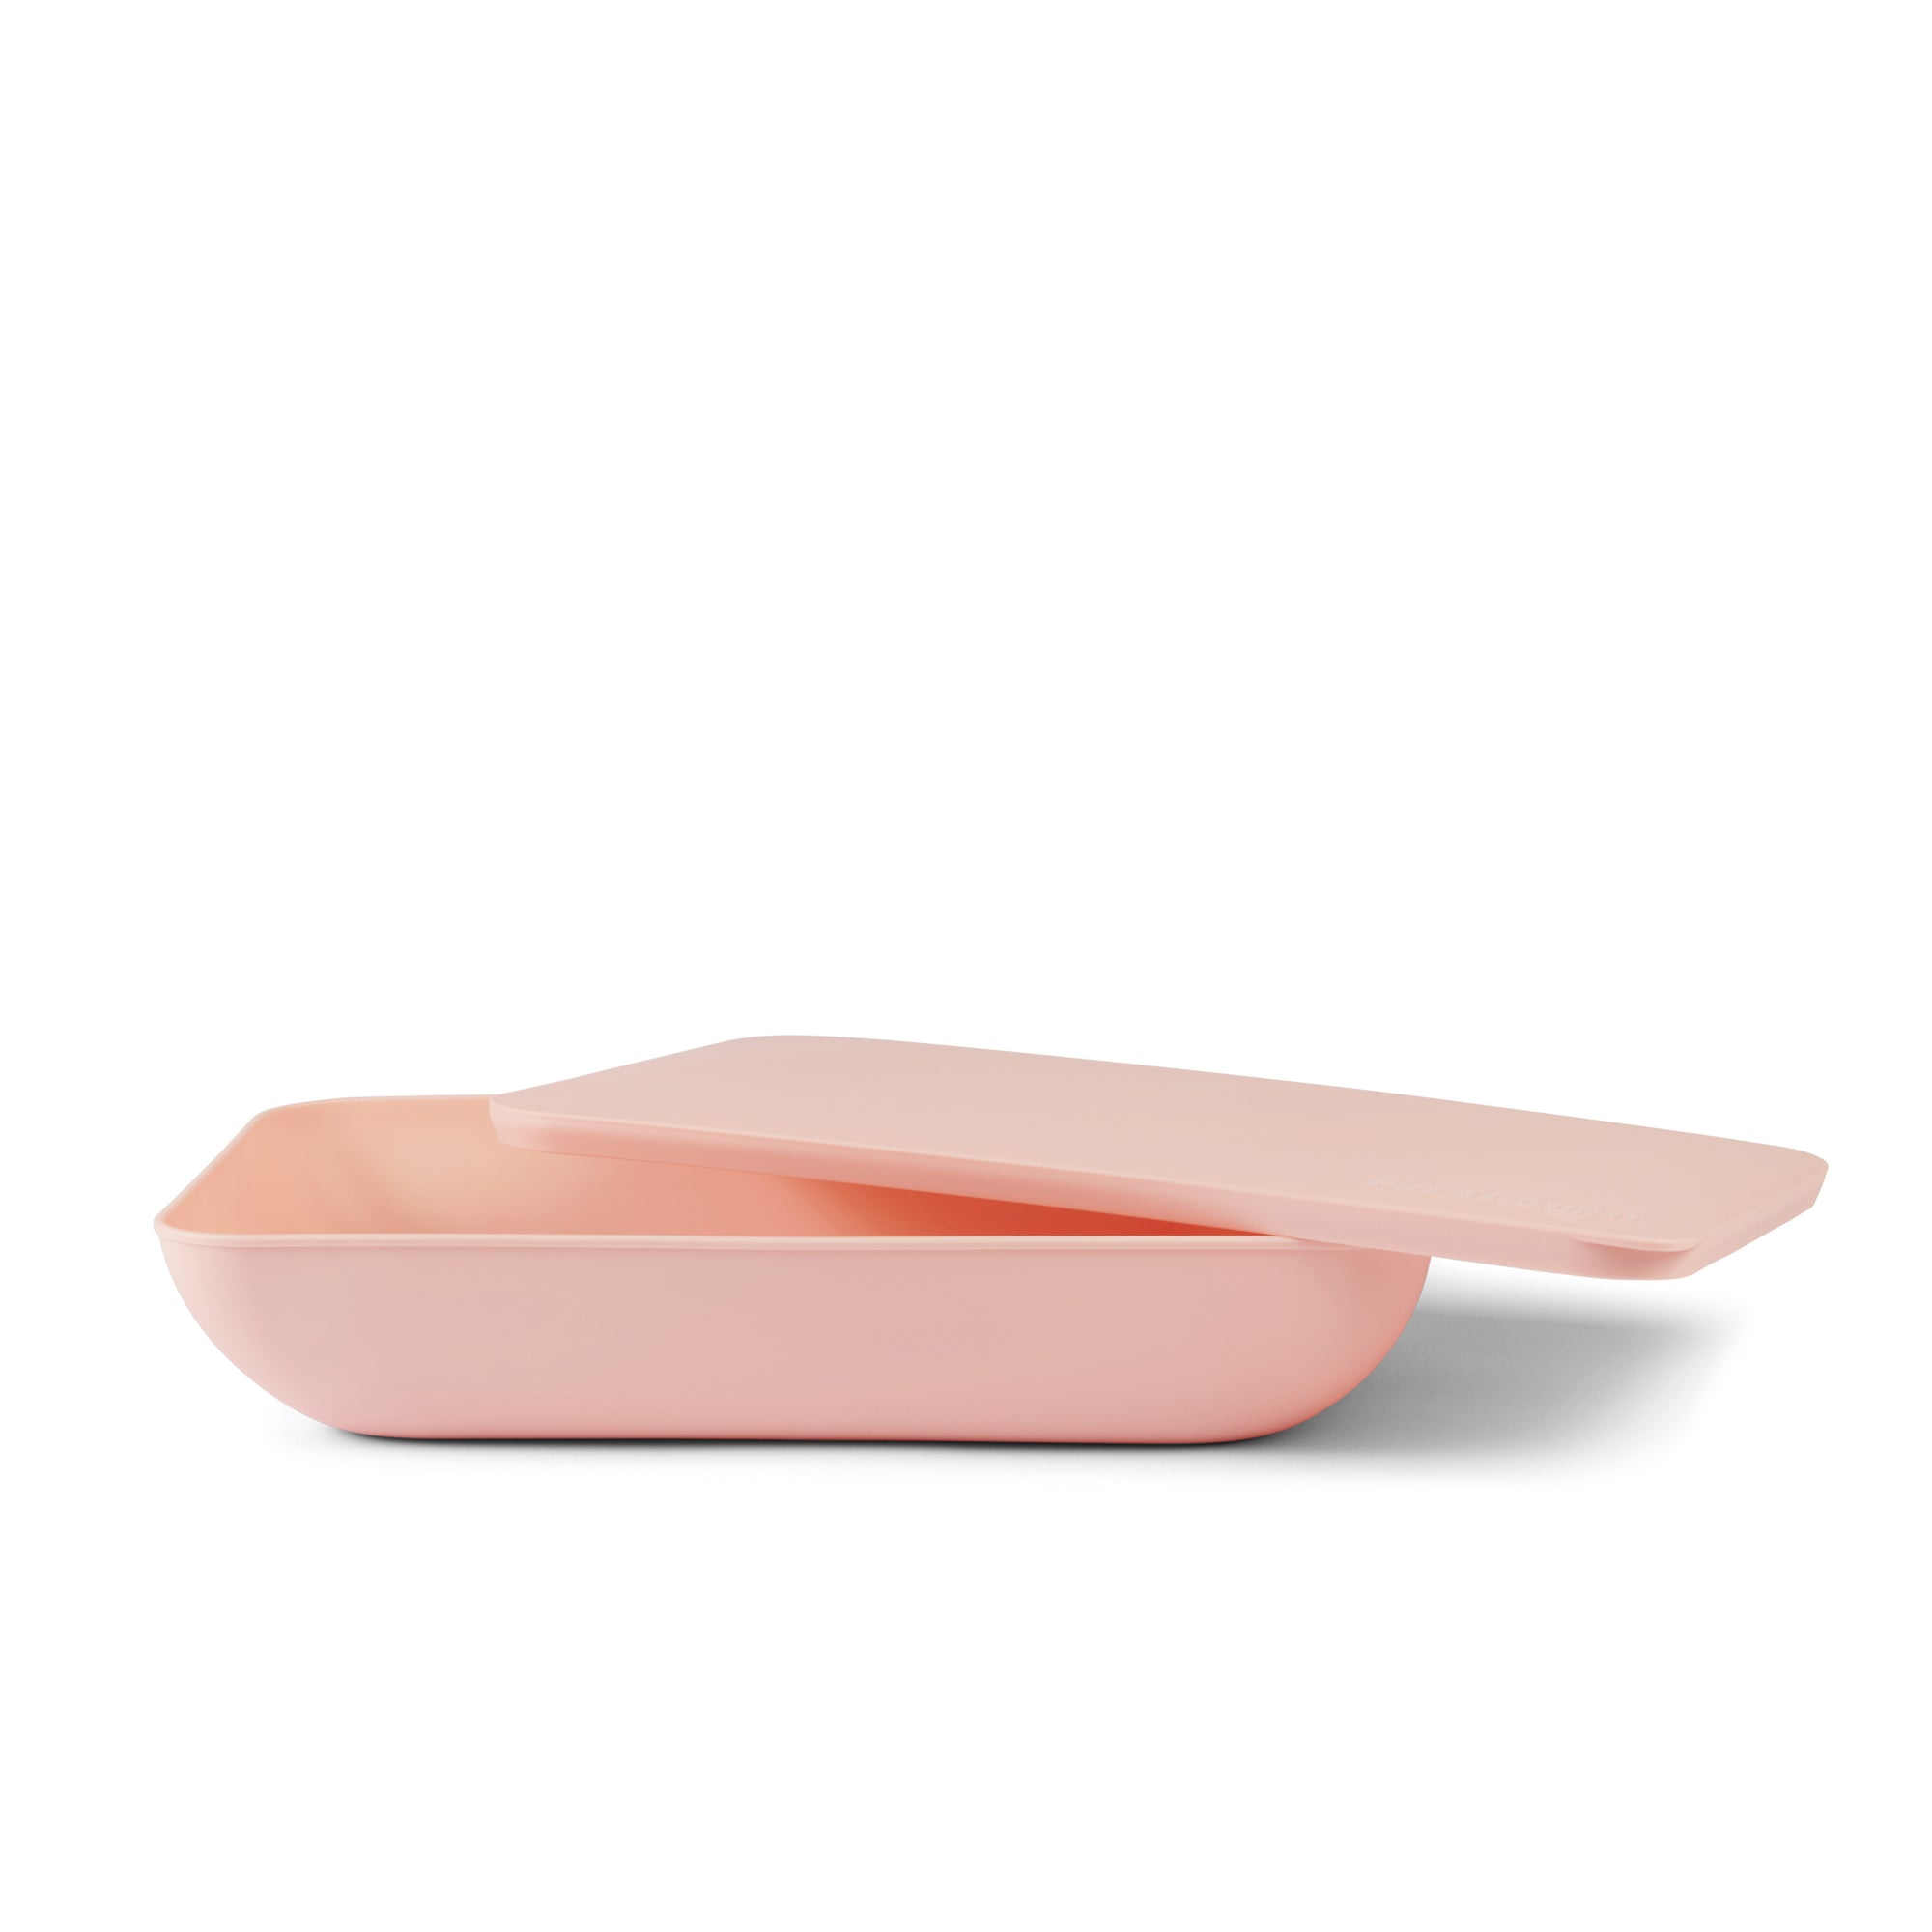 Put a lid on it - Serving platter with a lid - Guava